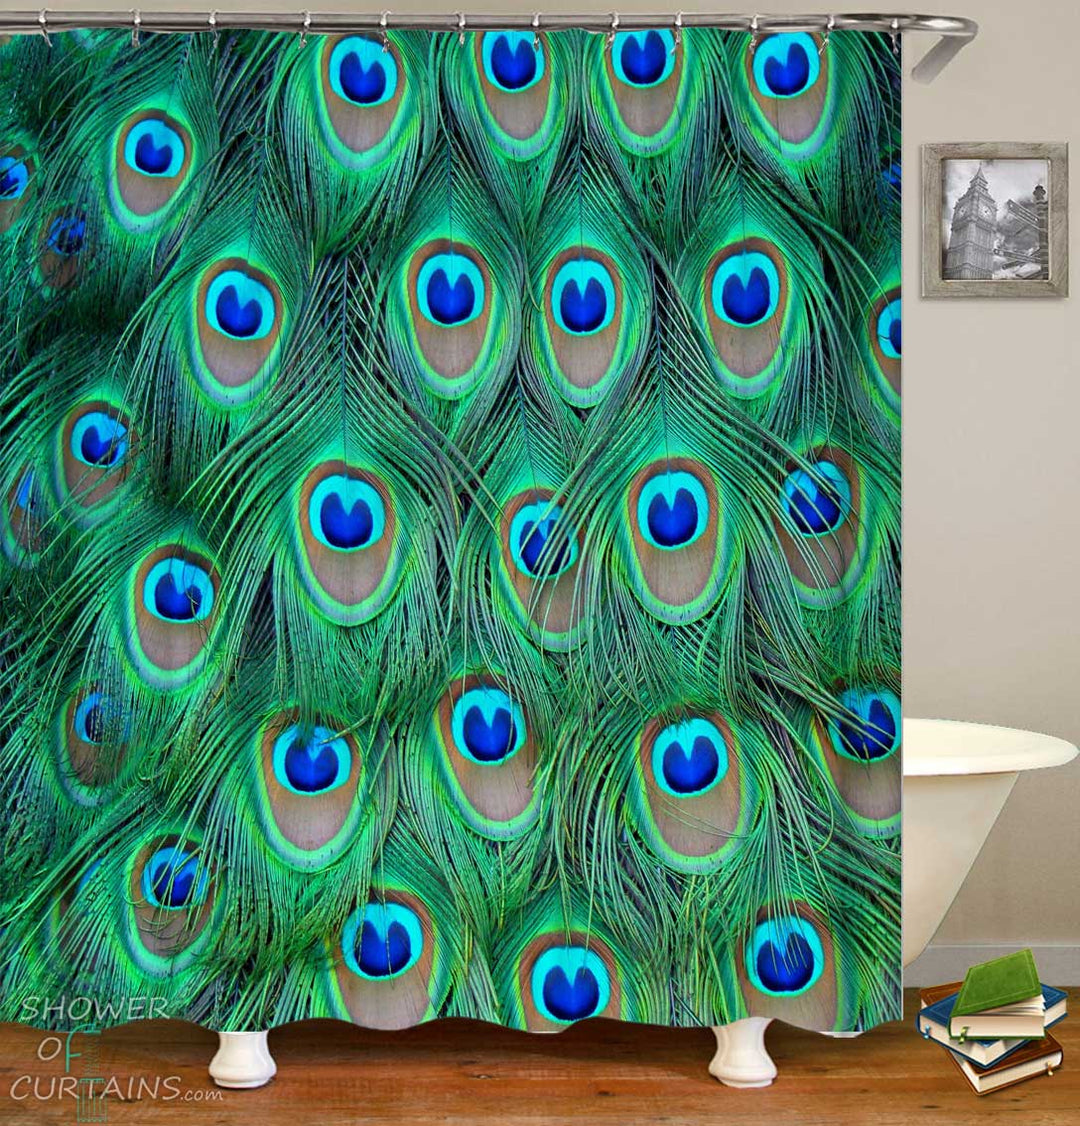 Shower Curtains with Blue Green Peacock Feathers